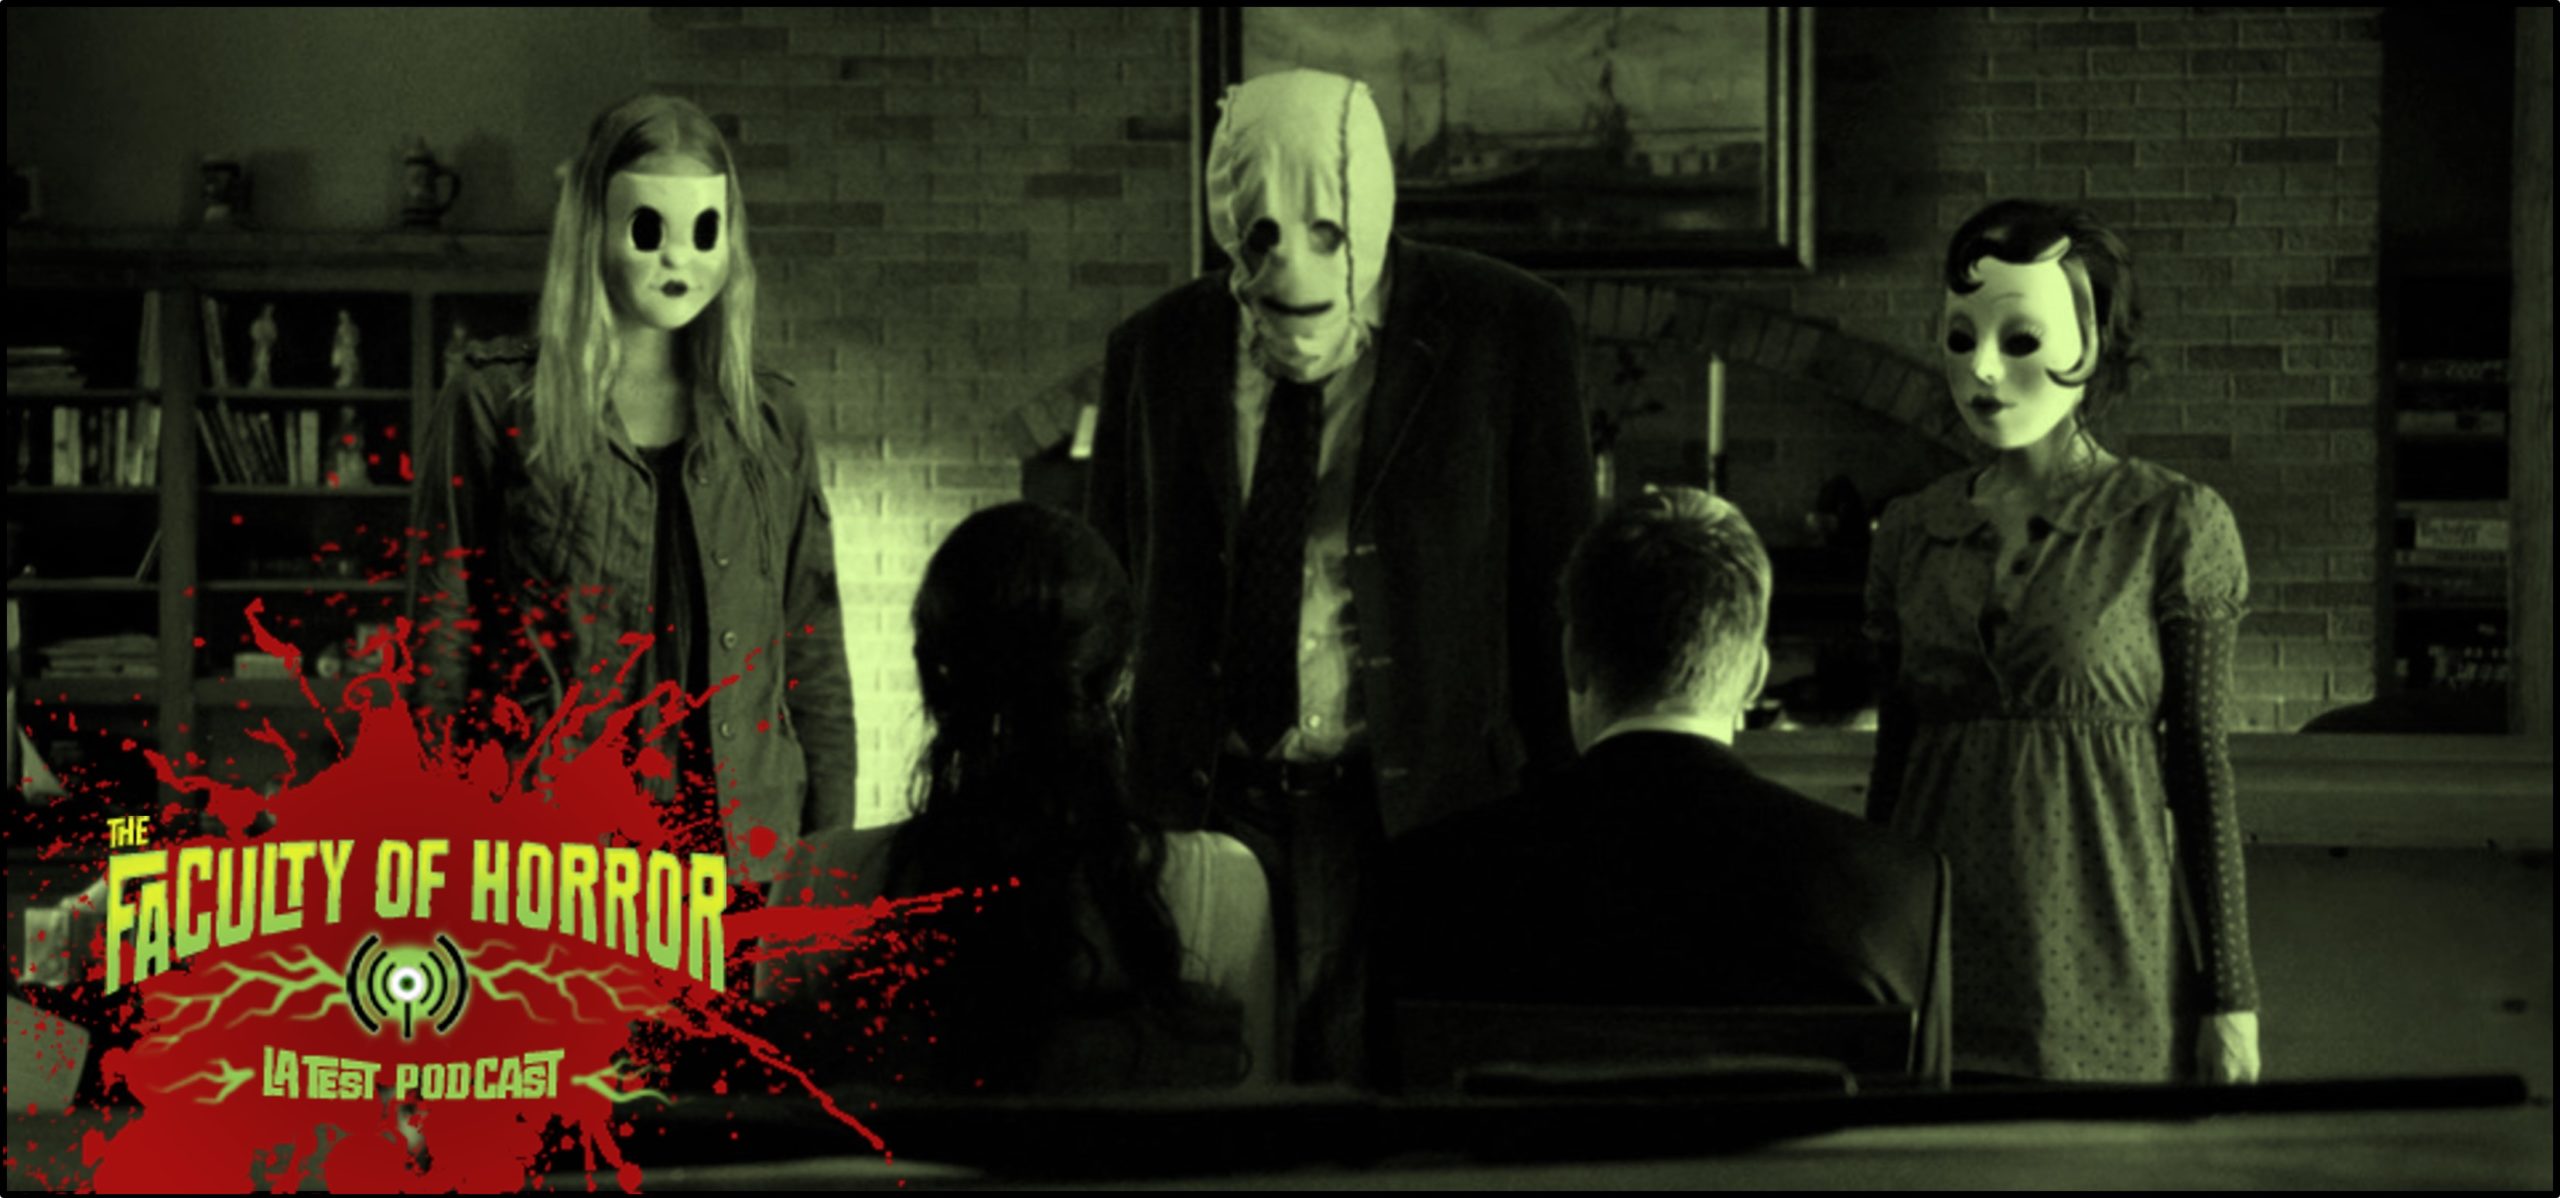 Is 'The Strangers' Based On A True Story?